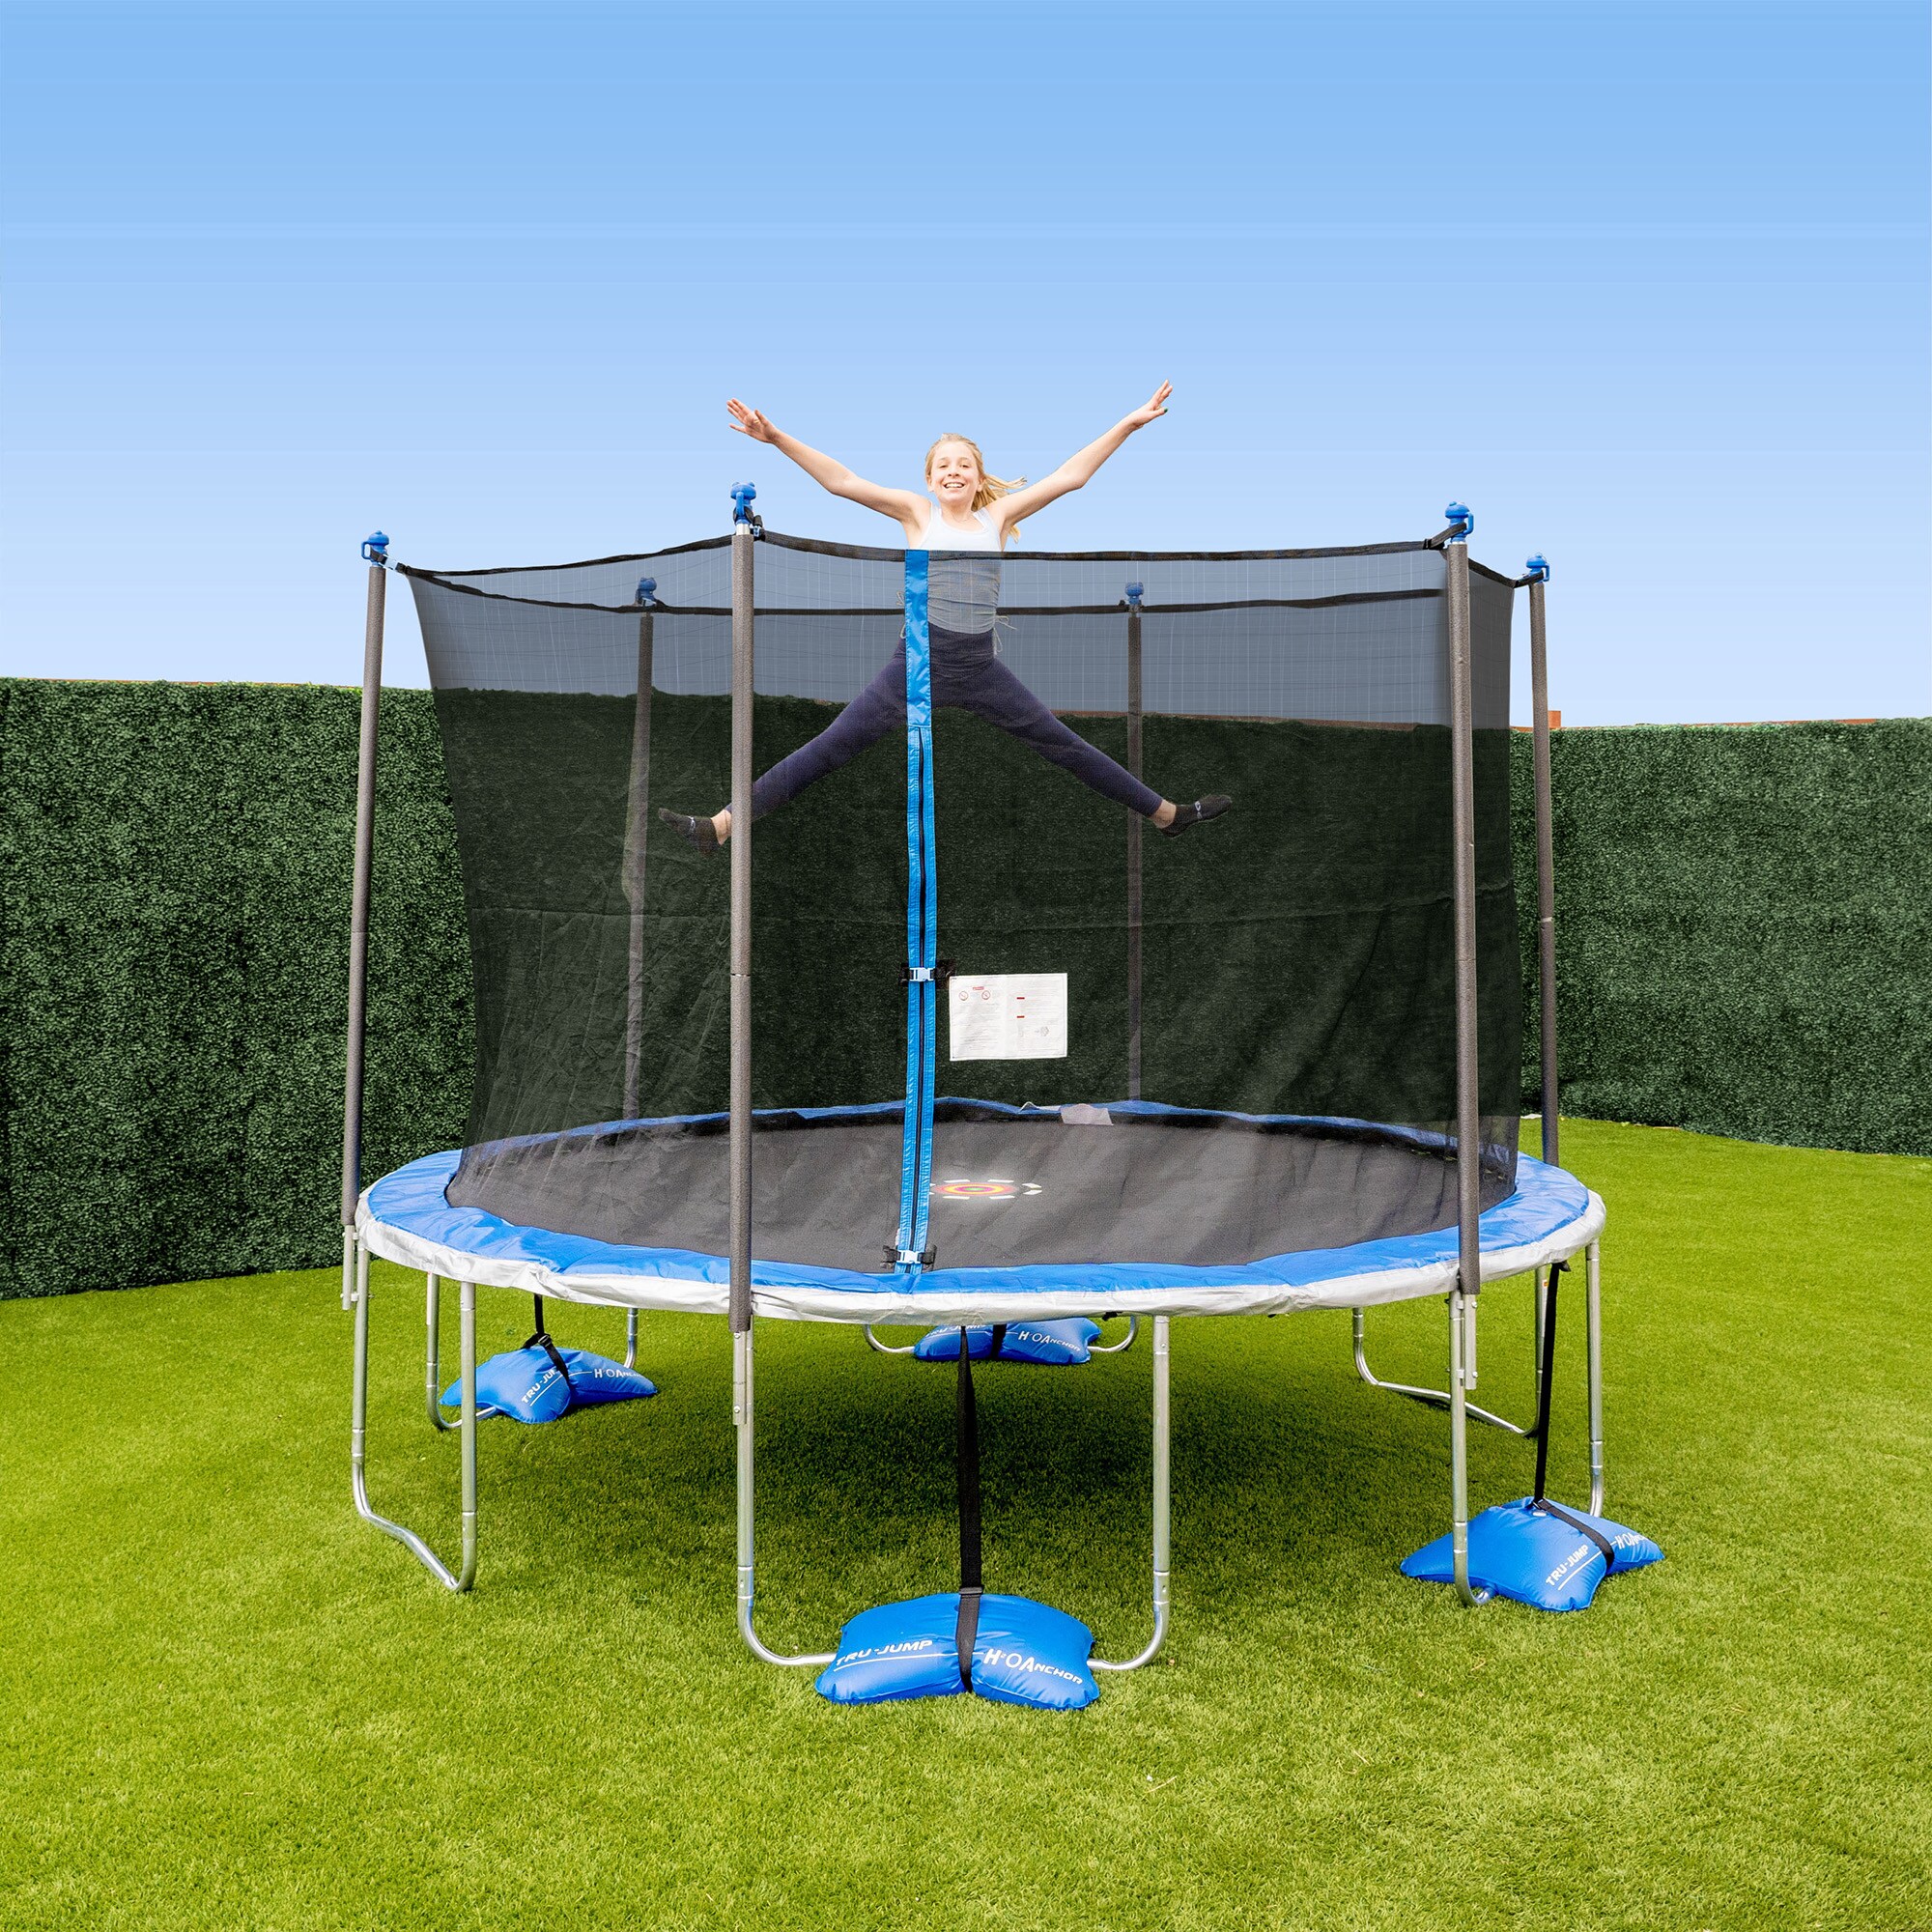 gispende kuvert Intrusion TruJump Trujump 12ft Trampoline (U-leg) and 6-pole Enclosure Combo with  Spin N Light and Water Anchor at Lowes.com